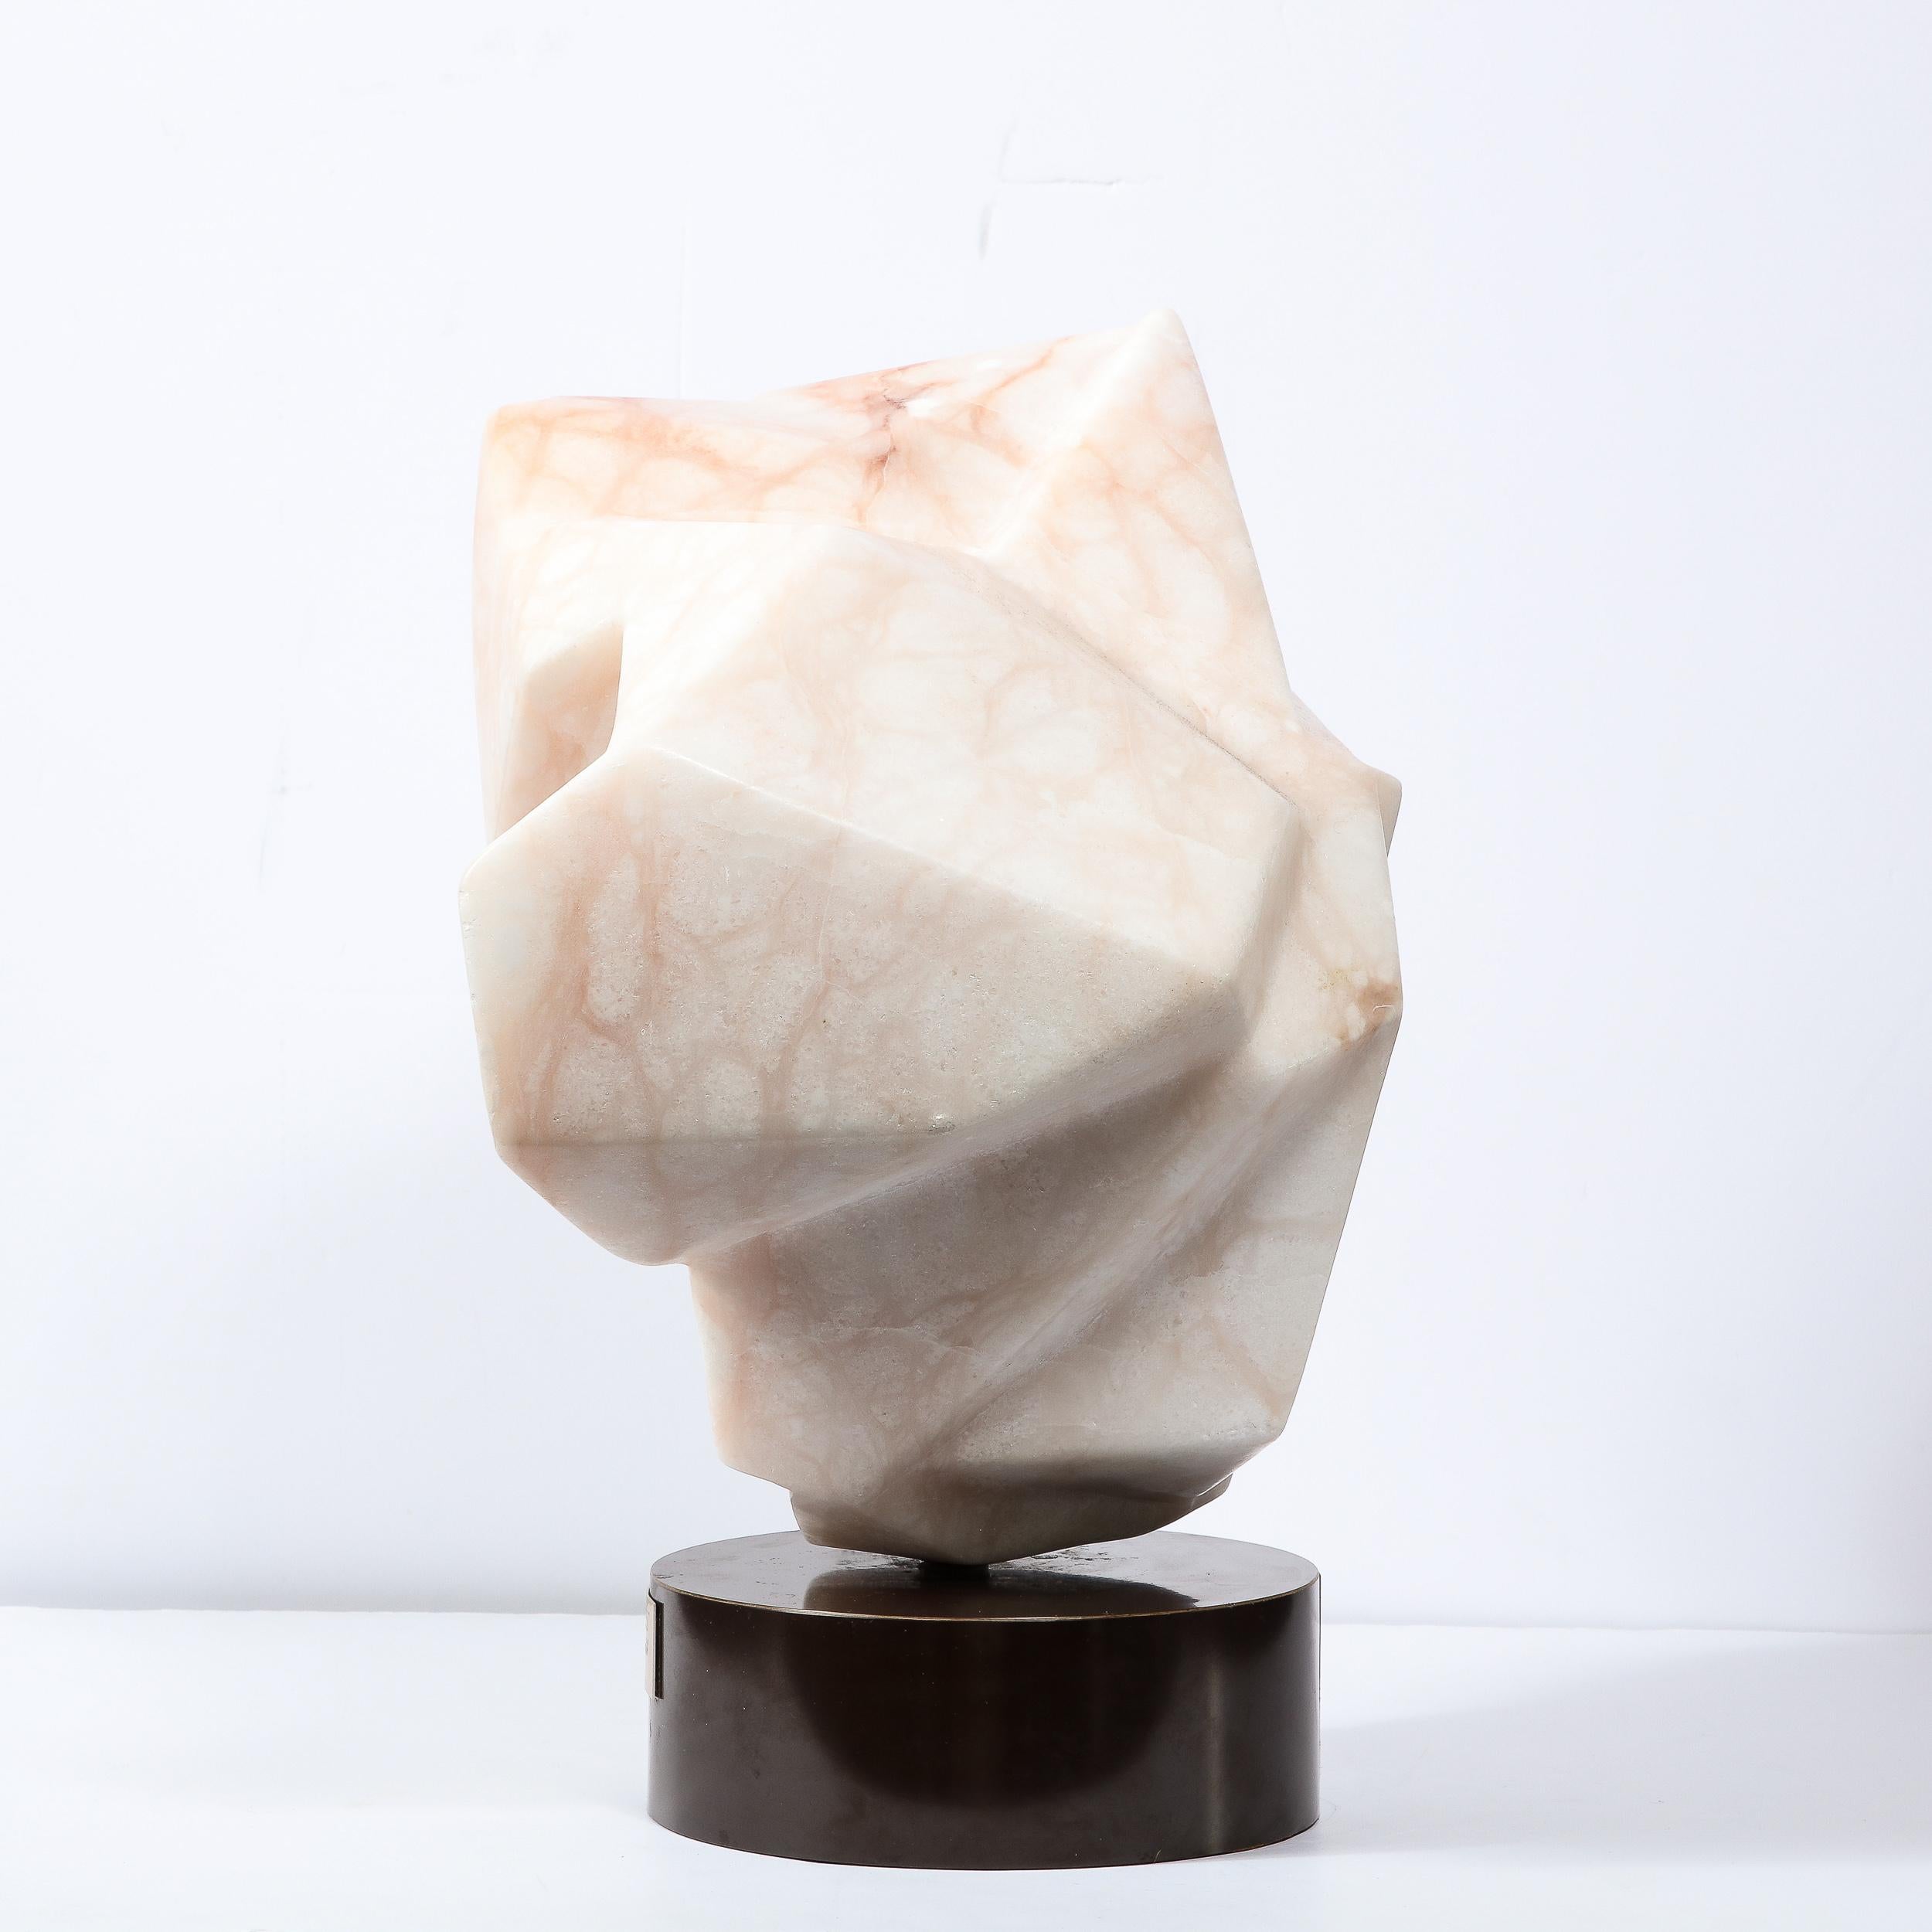 American Modernist Abstract Geometric Exotic Marble Sculpture, 